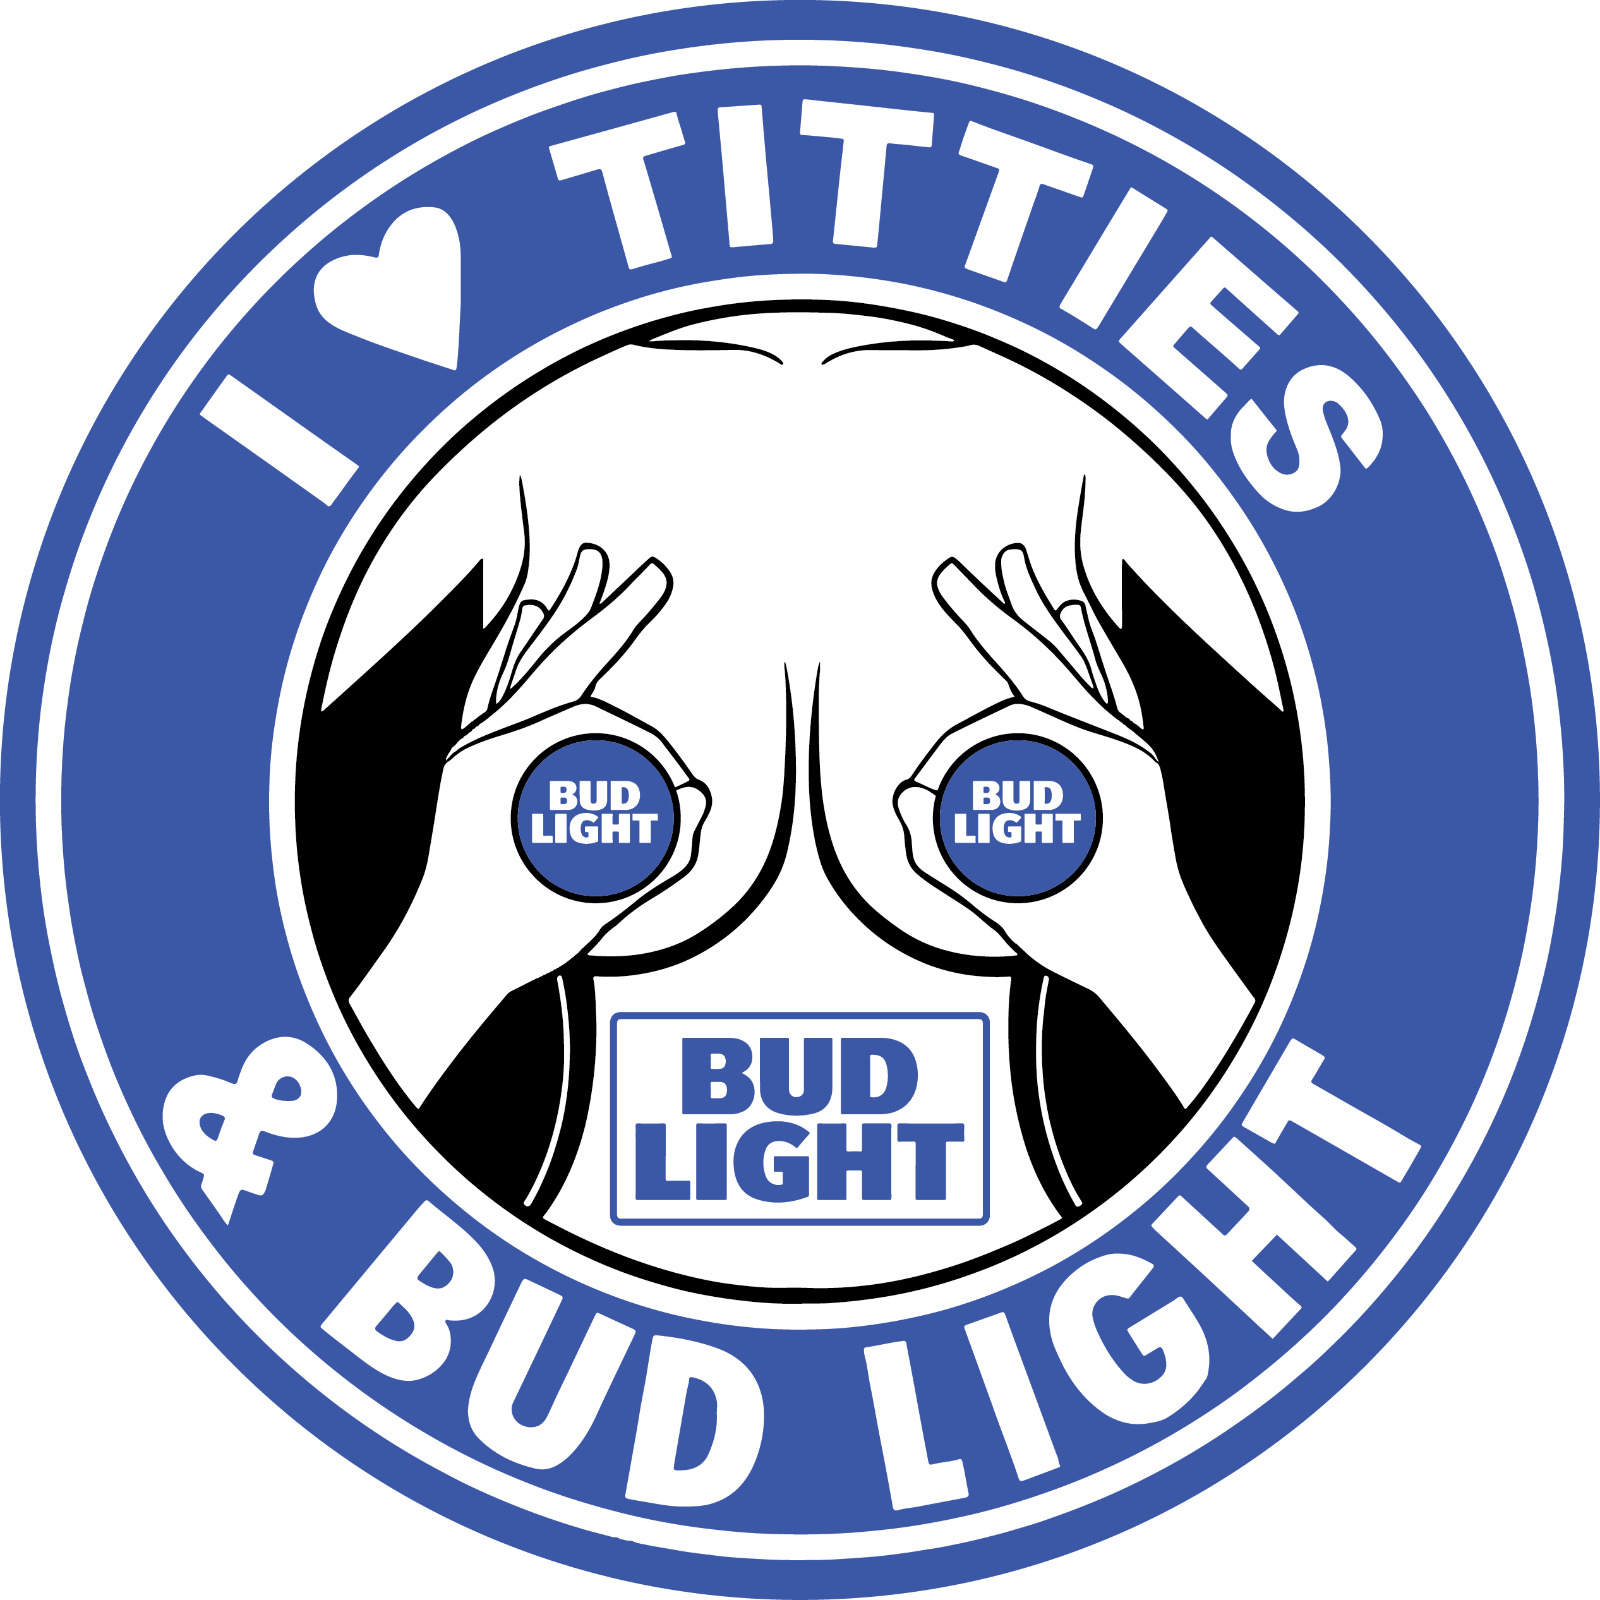 https://simhq.com/store/img-large/g/ja8AAOSwiXZhT5sP/s-l1600/I-Love-Titties-and-Bud-Light-Decal-printed-on-whit.jpg